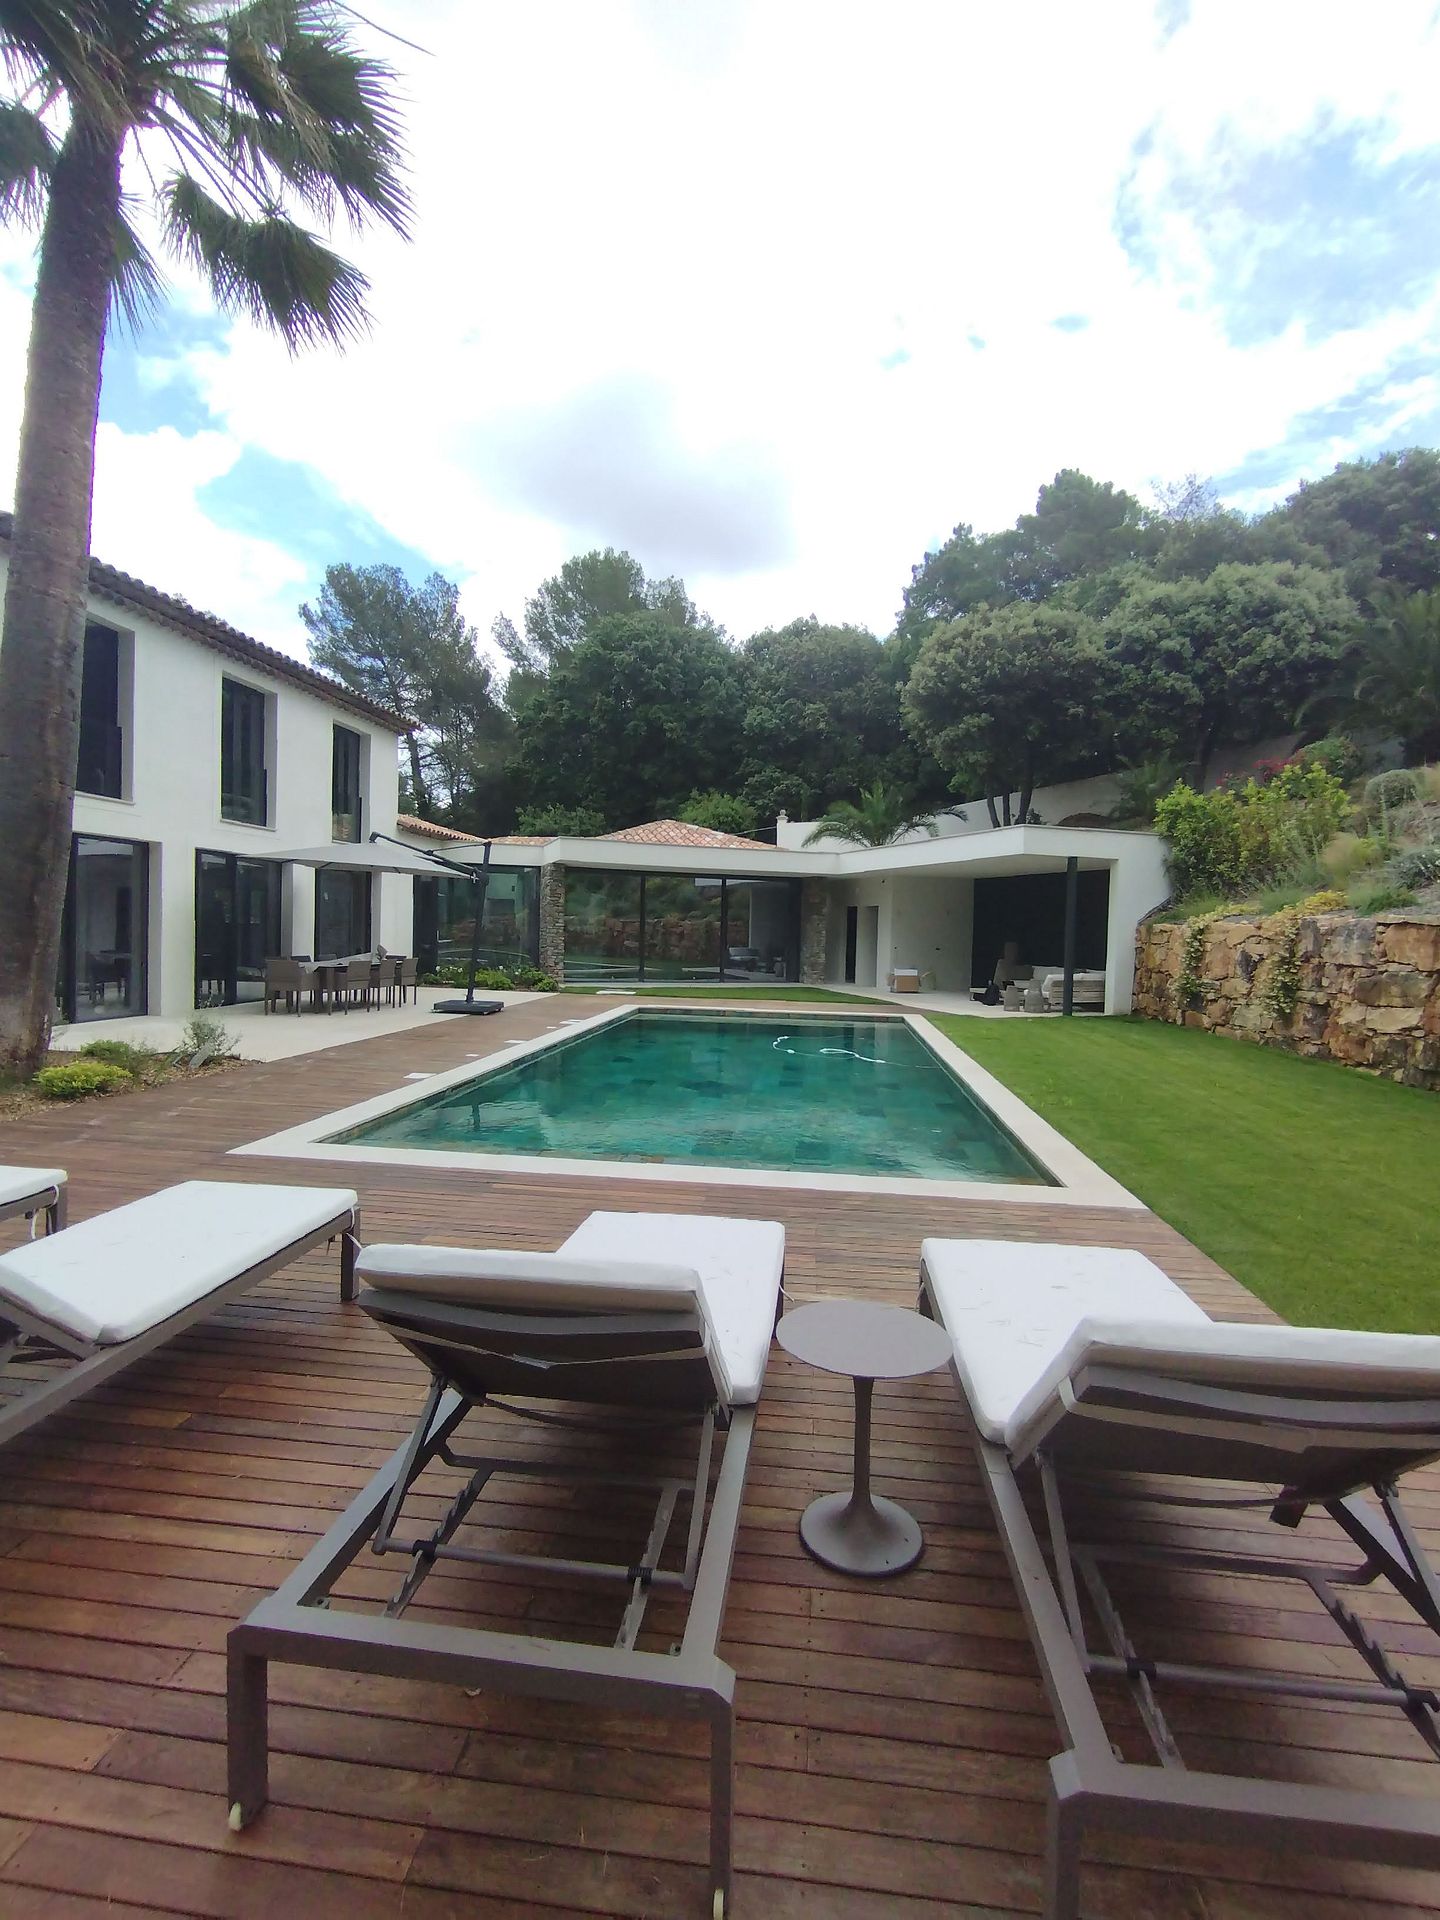 4 bed Villa For Sale in French Riviera, South of France